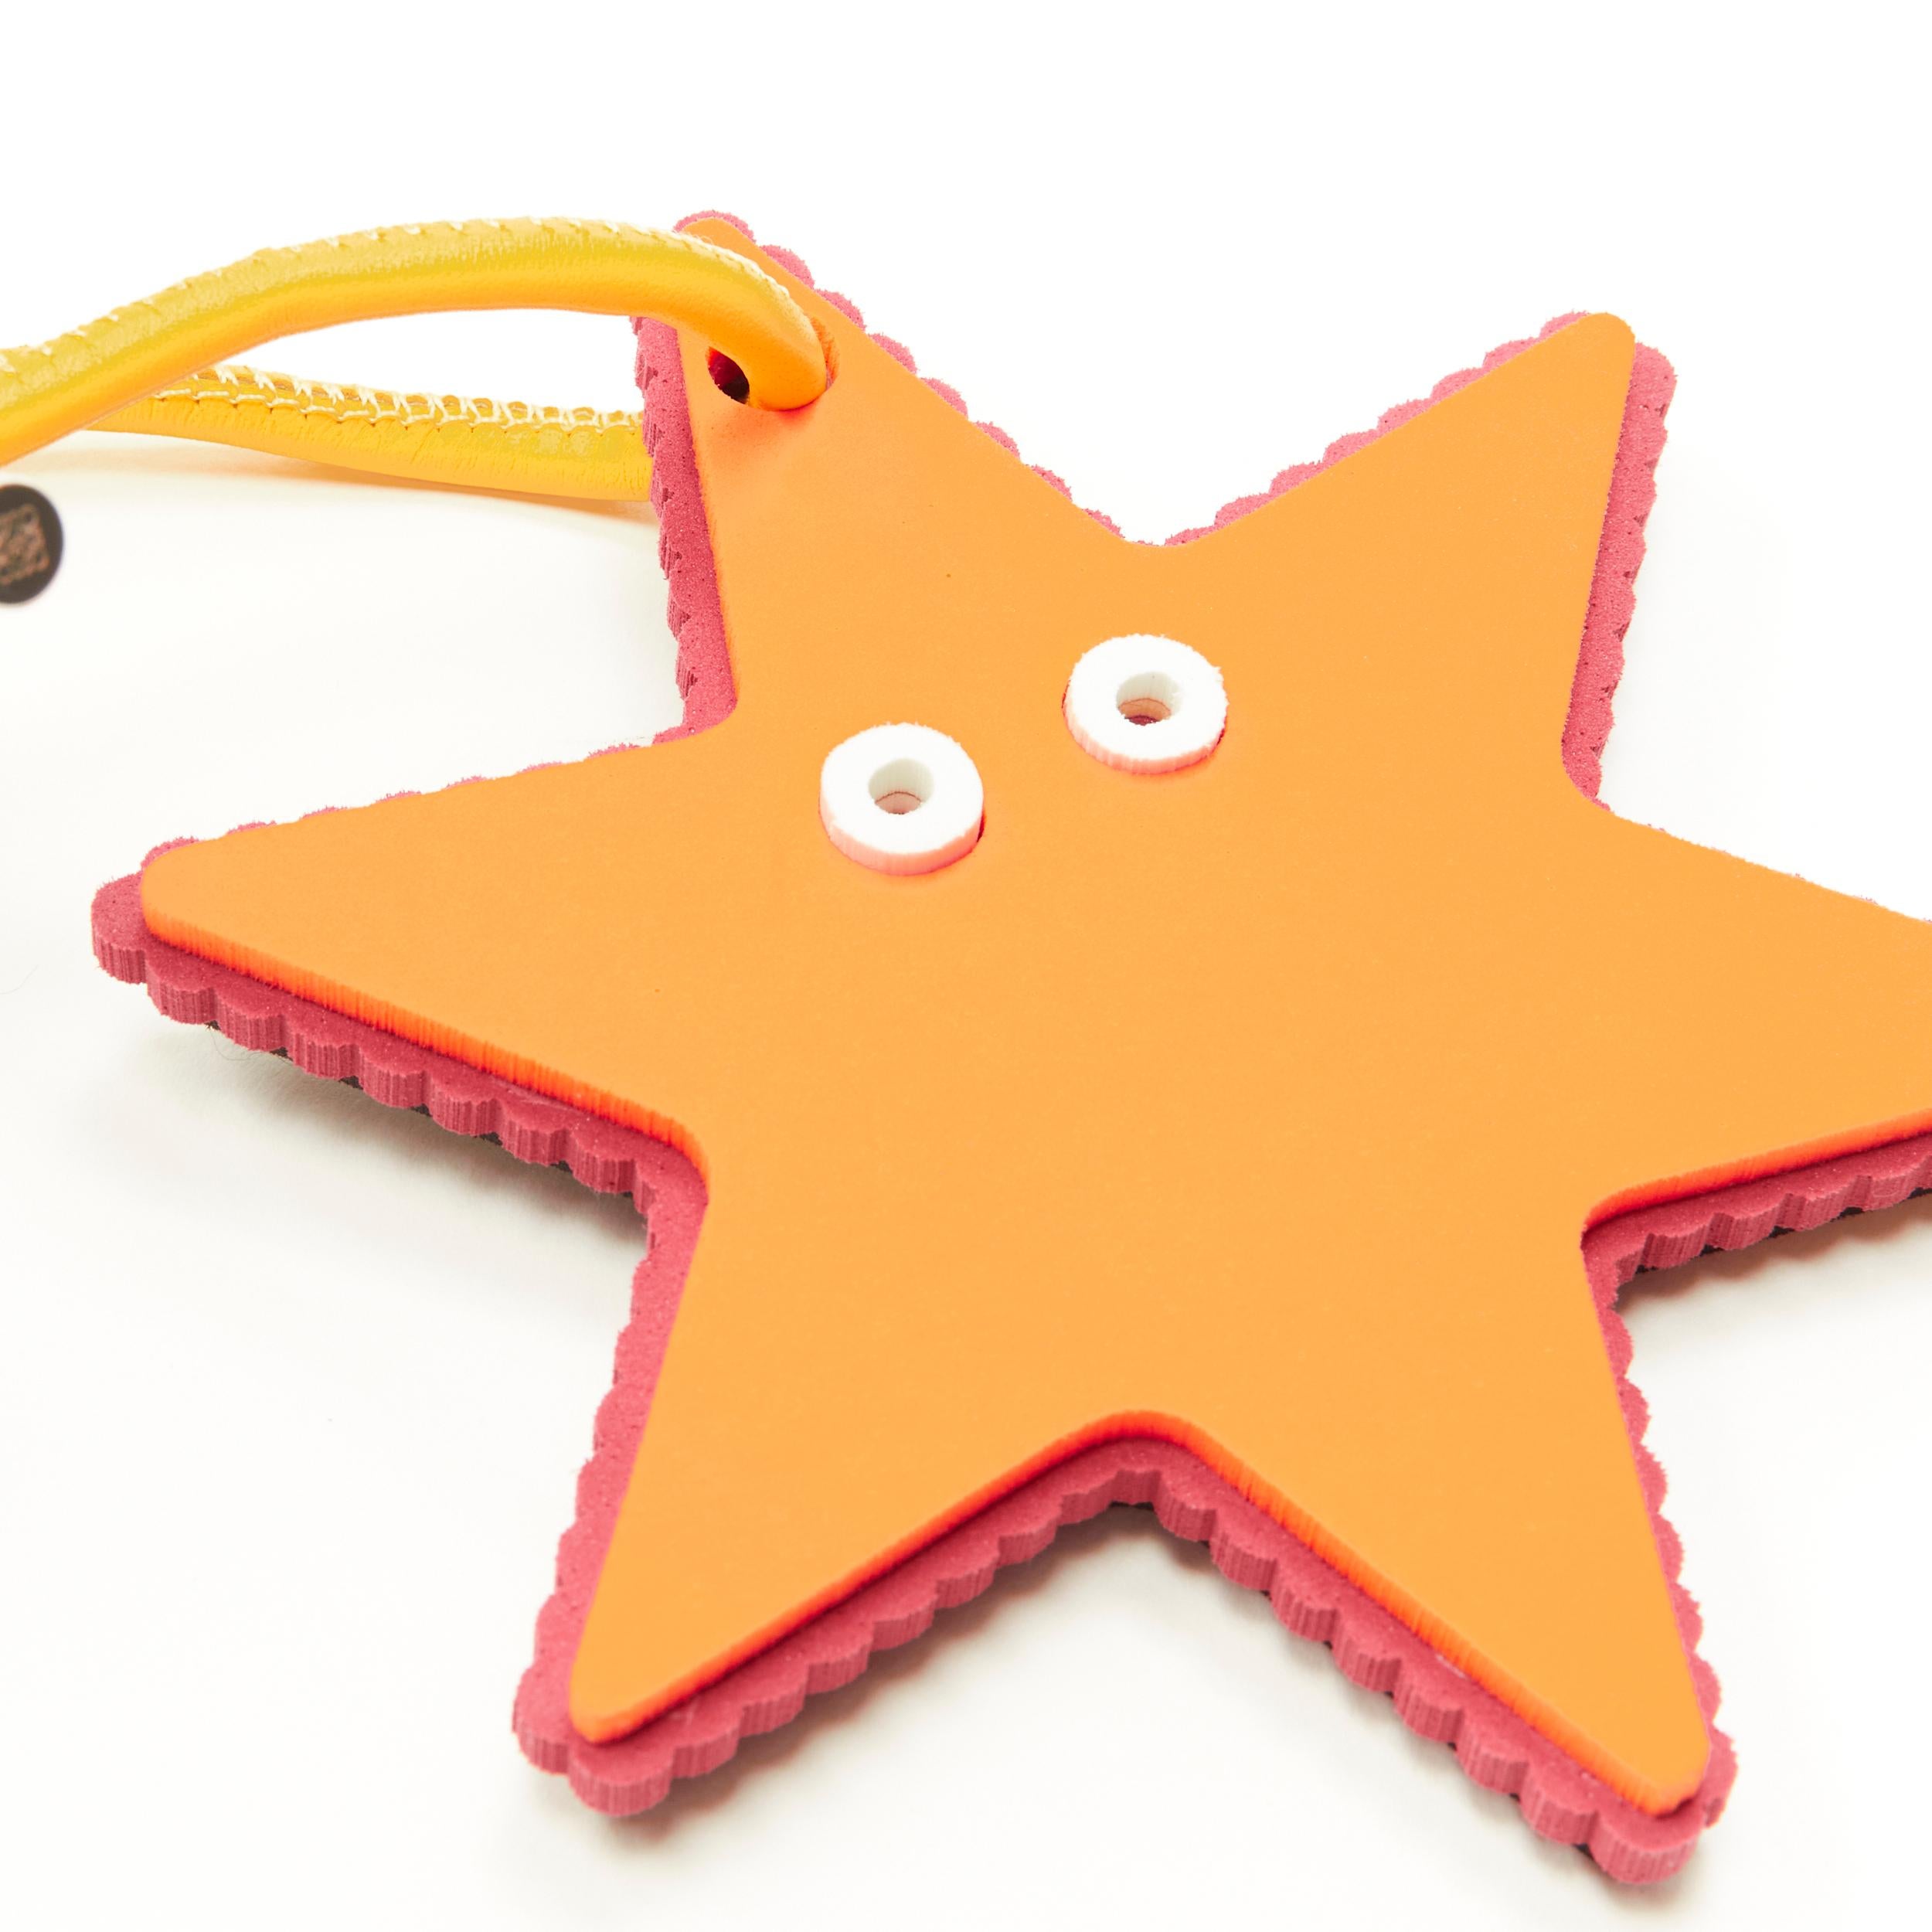 LOEWE orange starfish foam yellow leather cord bag charm 
Reference: ANWU/A00107 
Brand: Loewe 
Designer: JW Anderson 
Material: Foam 
Color: Orange 
Pattern: Solid 
Closure: Tie 
Extra Detail: Styrofoam charm with leather cord self tie strap.